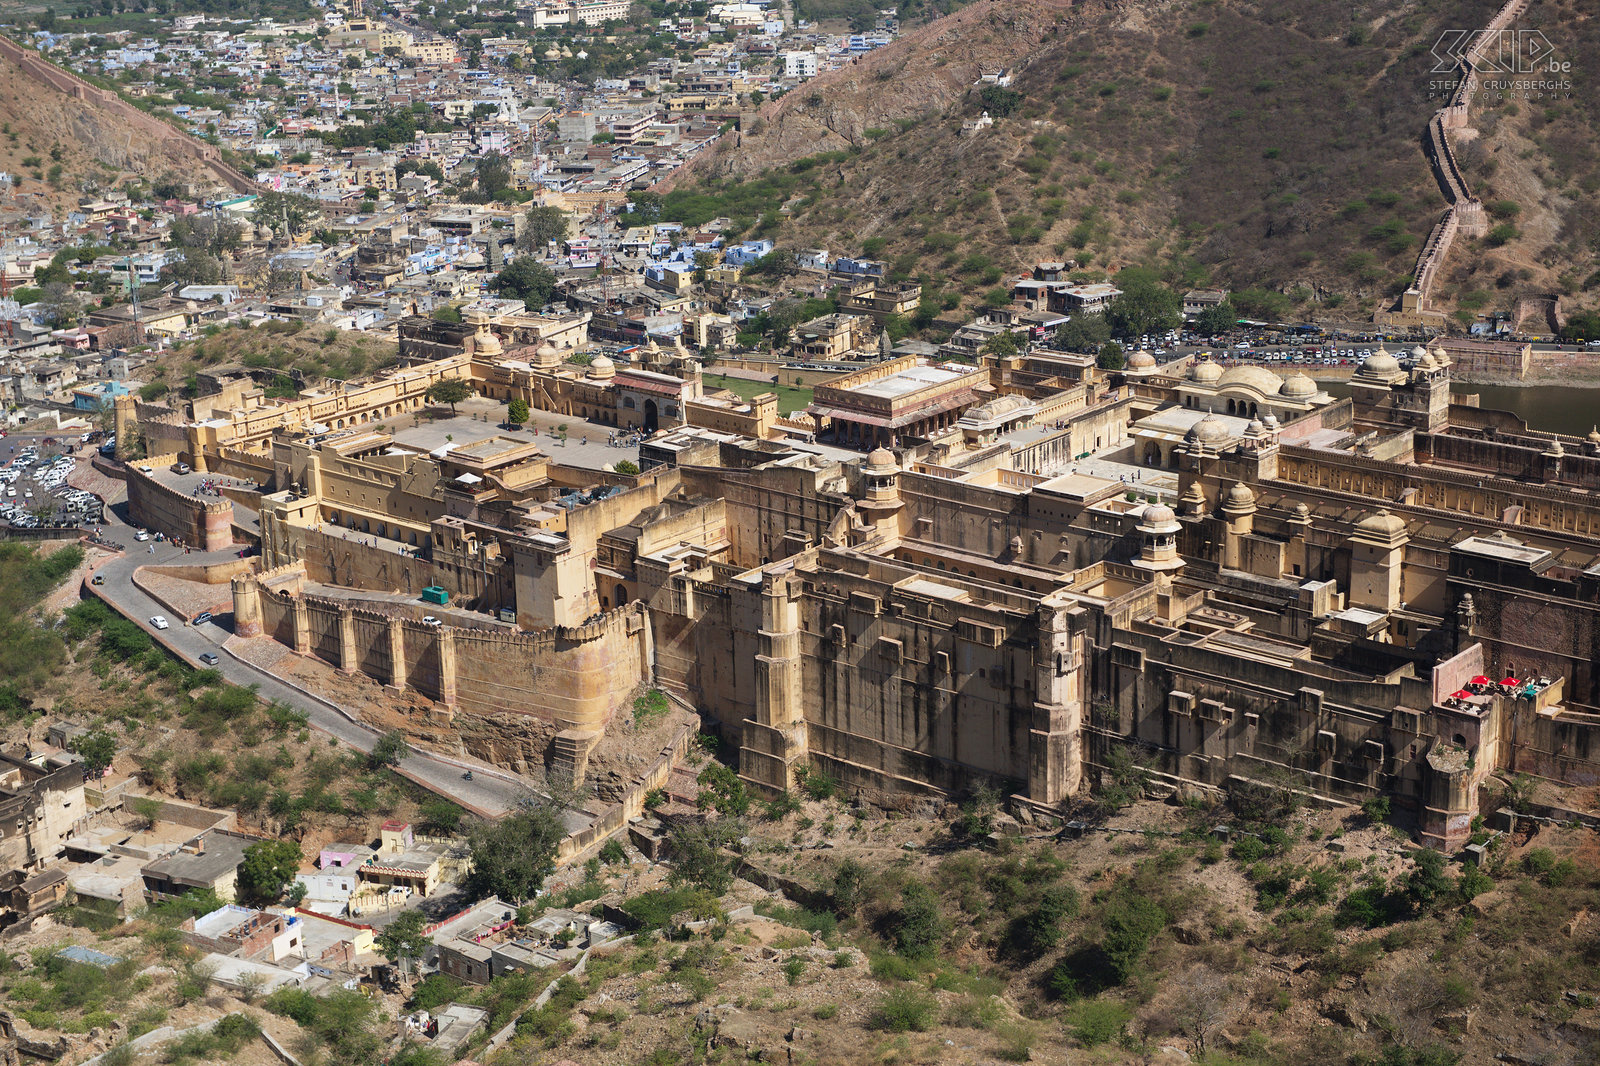 Jaipur - Amber fort From the Jaigarh fort you have a magnificent view on the impressive Amber fort. Stefan Cruysberghs